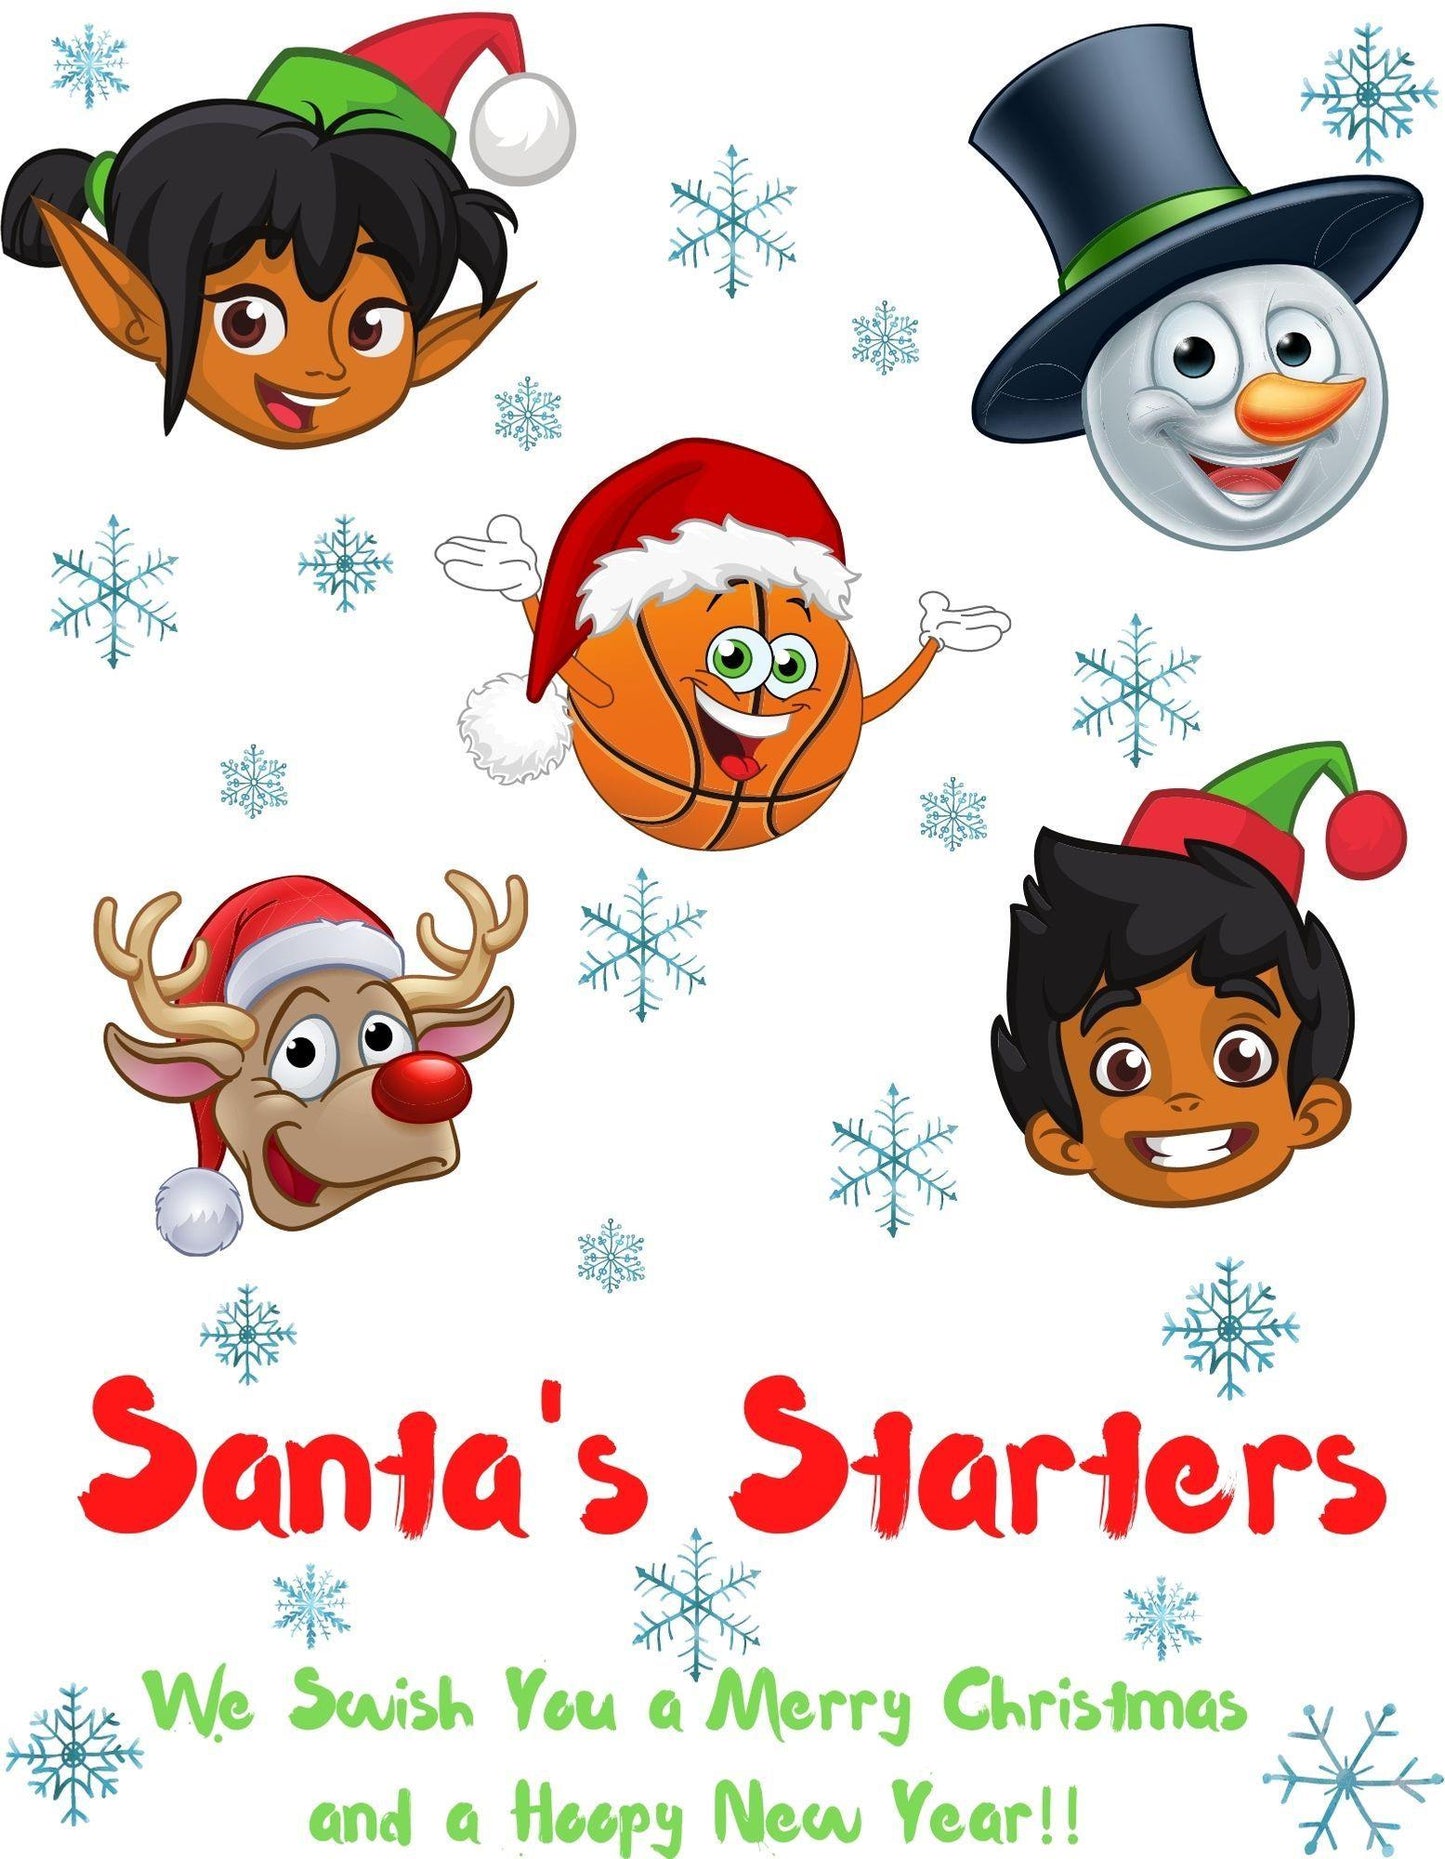 Model wearing a basketball The design features 5 cartoon character heads of 2 elves, a snowman, Rudolf and a basketball head with the heading Santa's Starters and sub heading We swish you a Merry Christmas and a Hoopy New Year. 